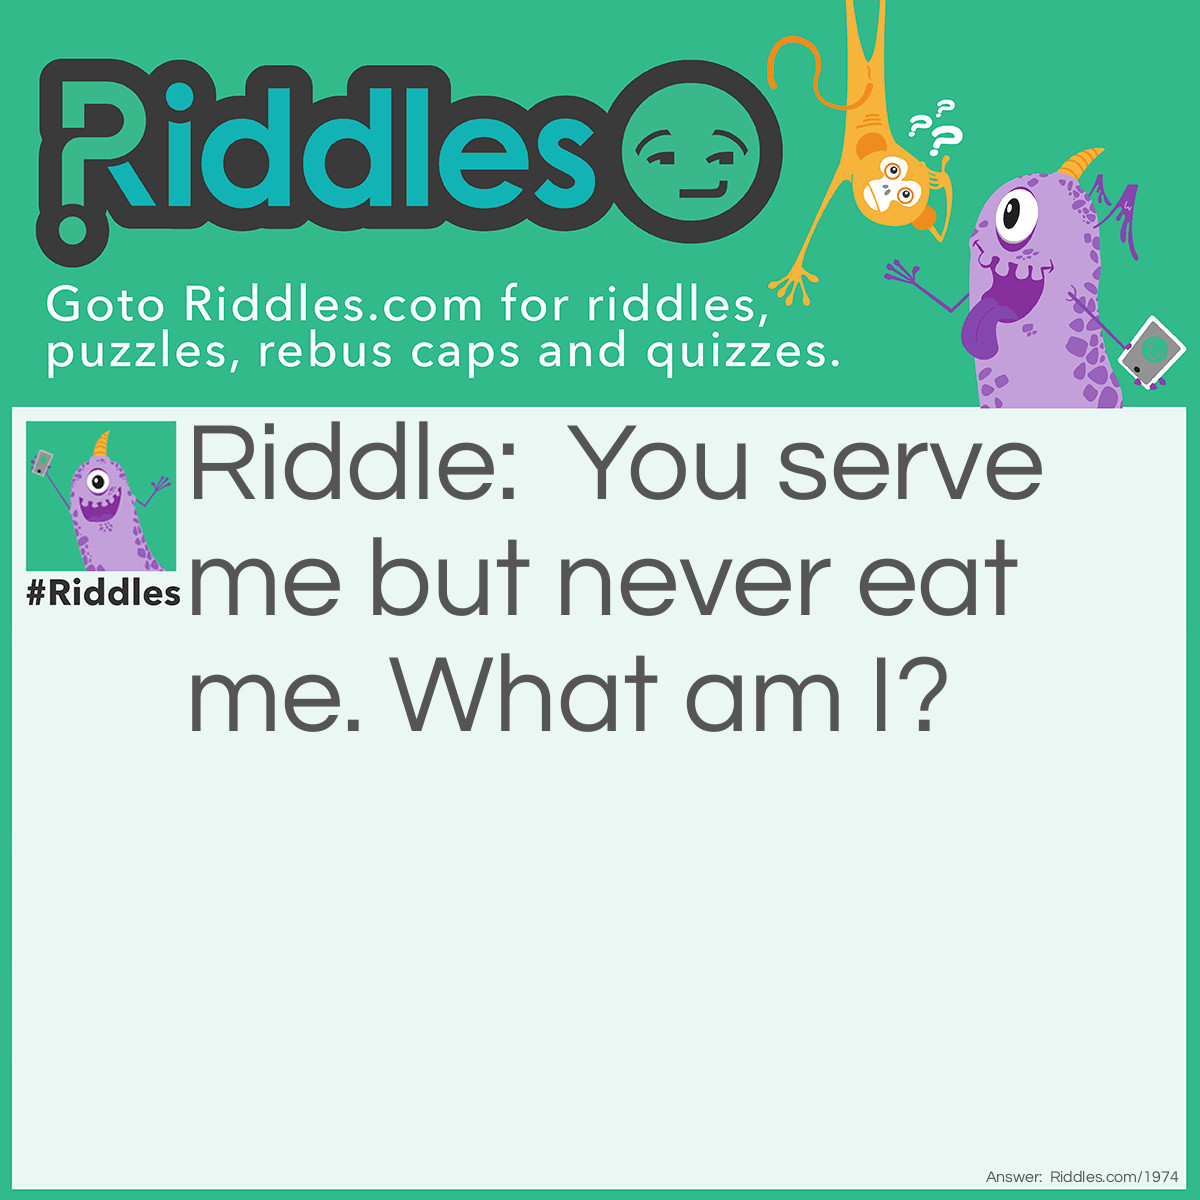 Riddle: You serve me but never eat me. What am I? Answer: A tennis ball.